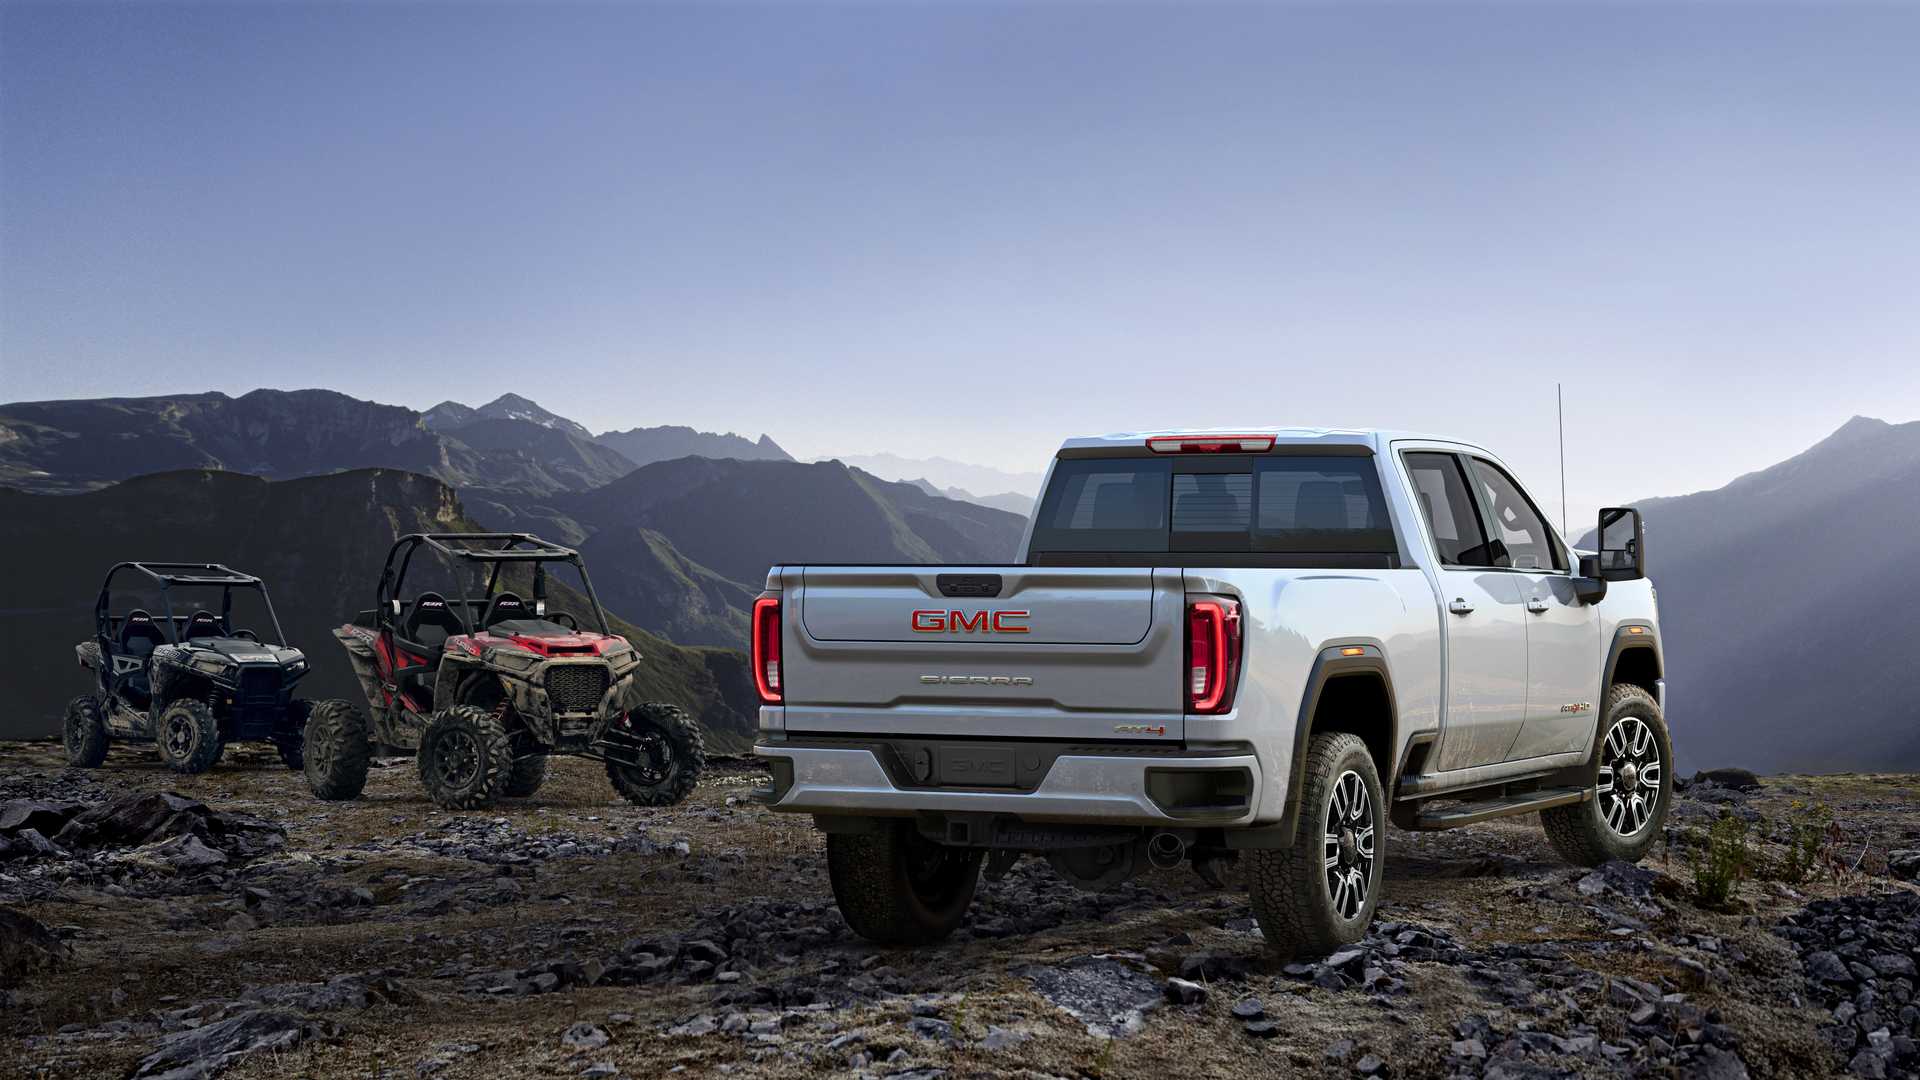 2020 Gmc Sierra Hd Looks Predictable Comes With Lots Of Tech